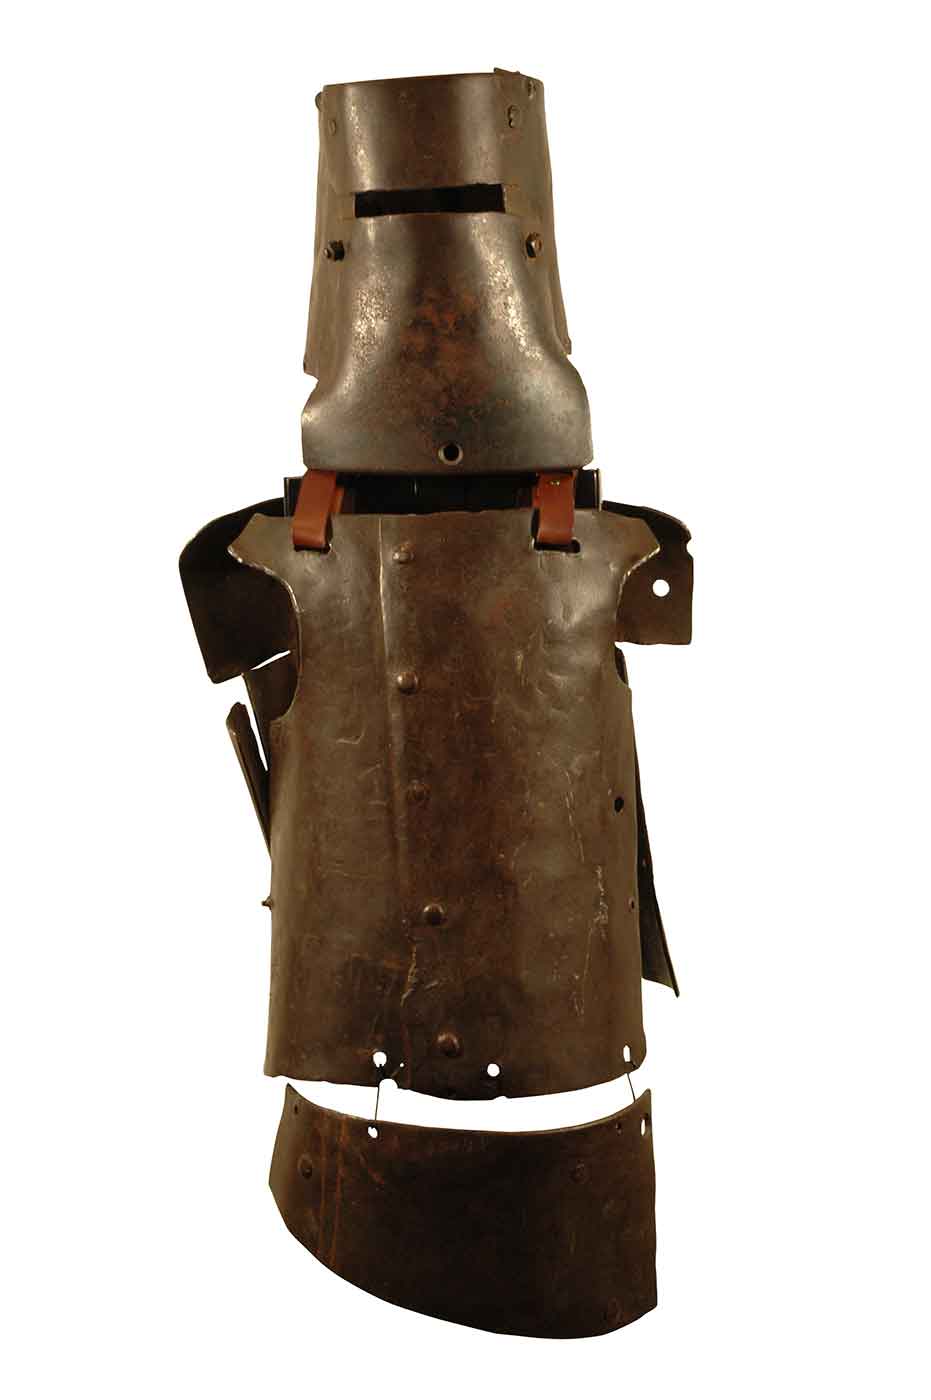 Crudely made armour fabricated from sections of iron. - click to view larger image